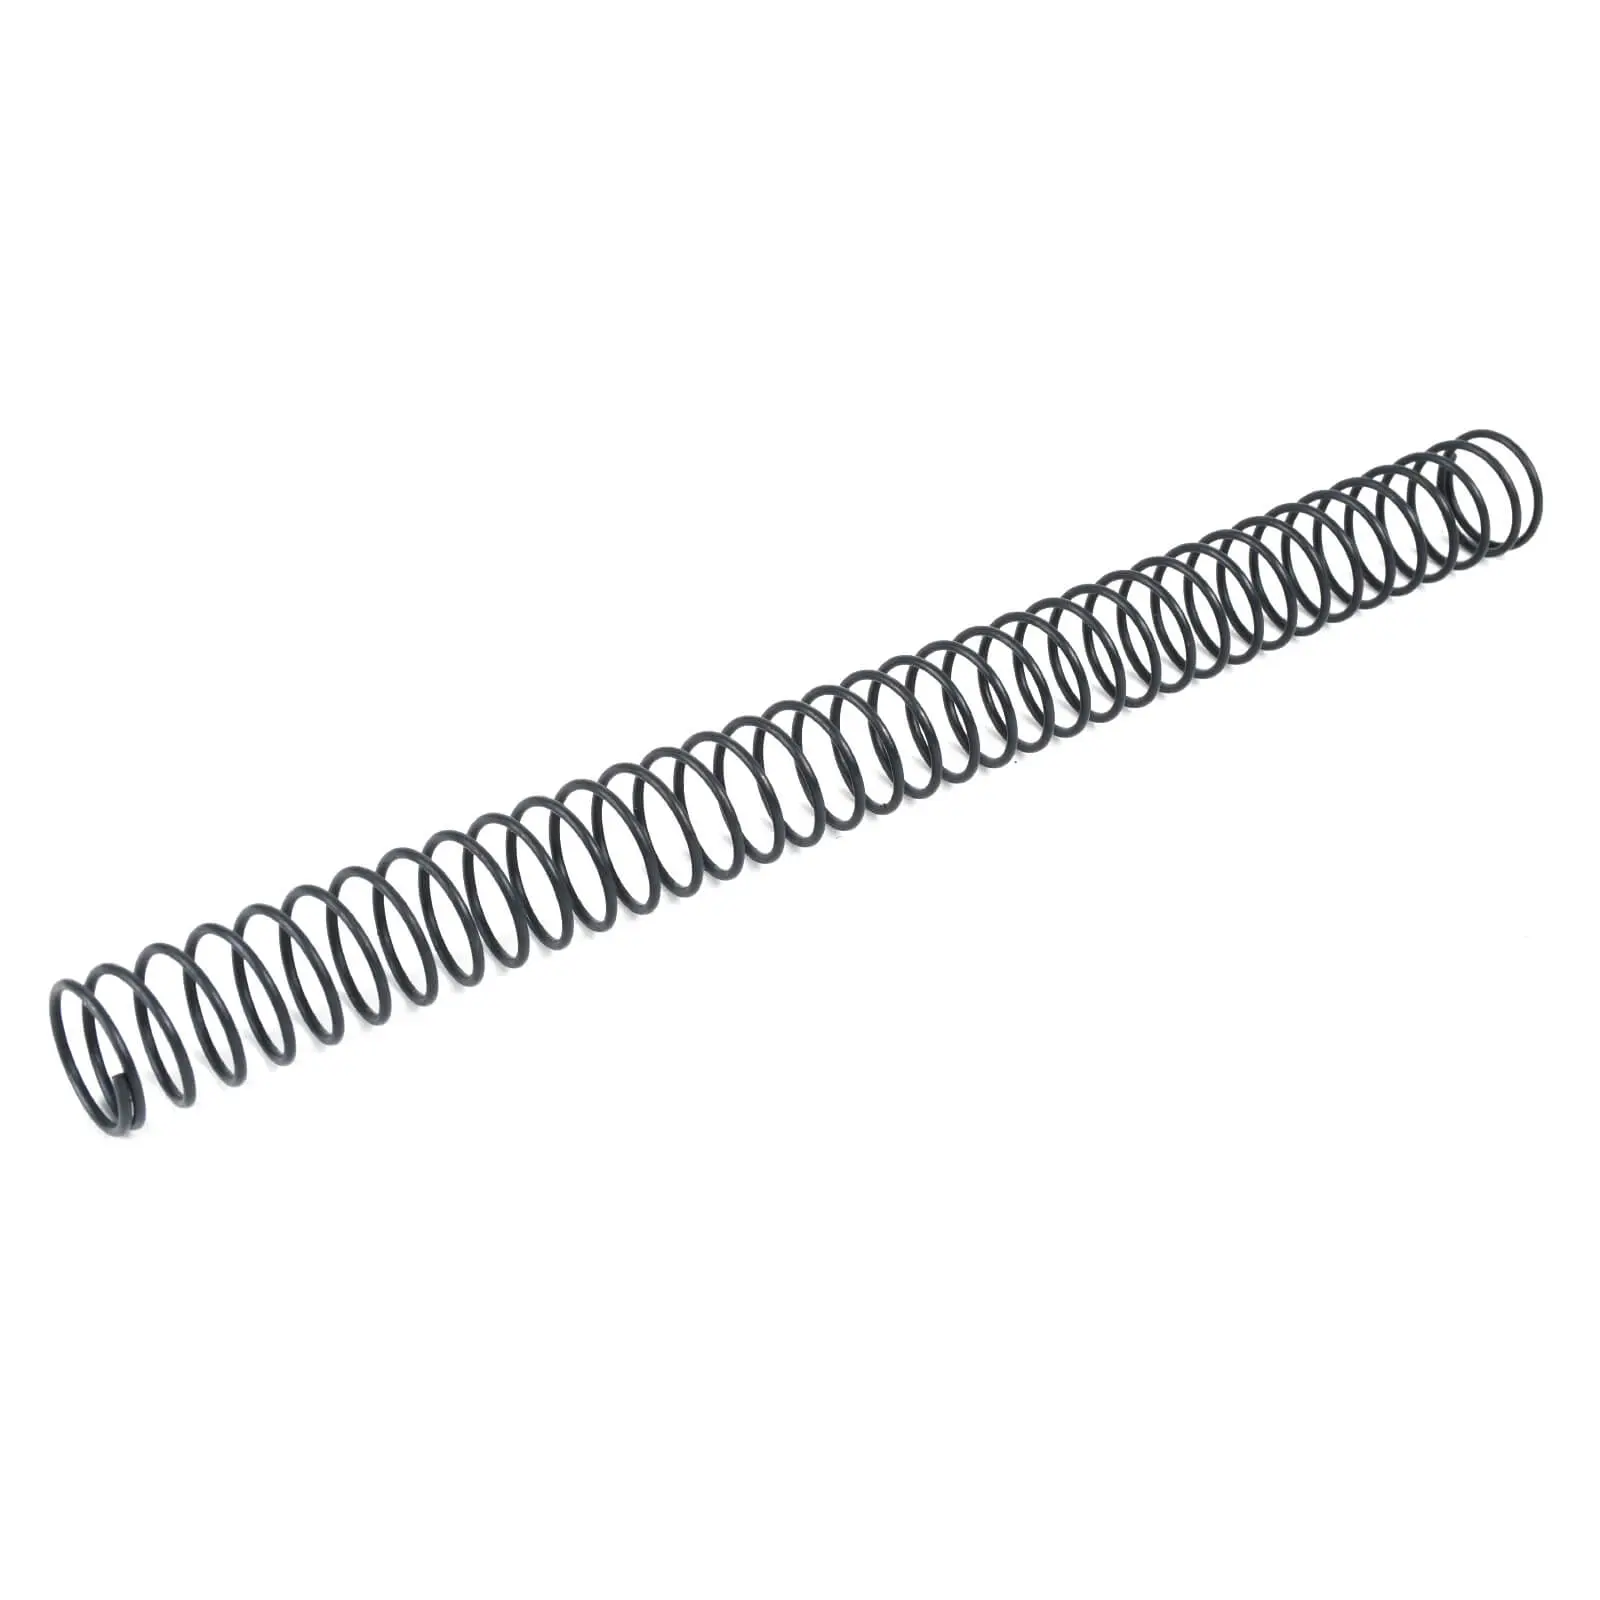 AT3 Tactical Carbine Buffer Spring for AR15